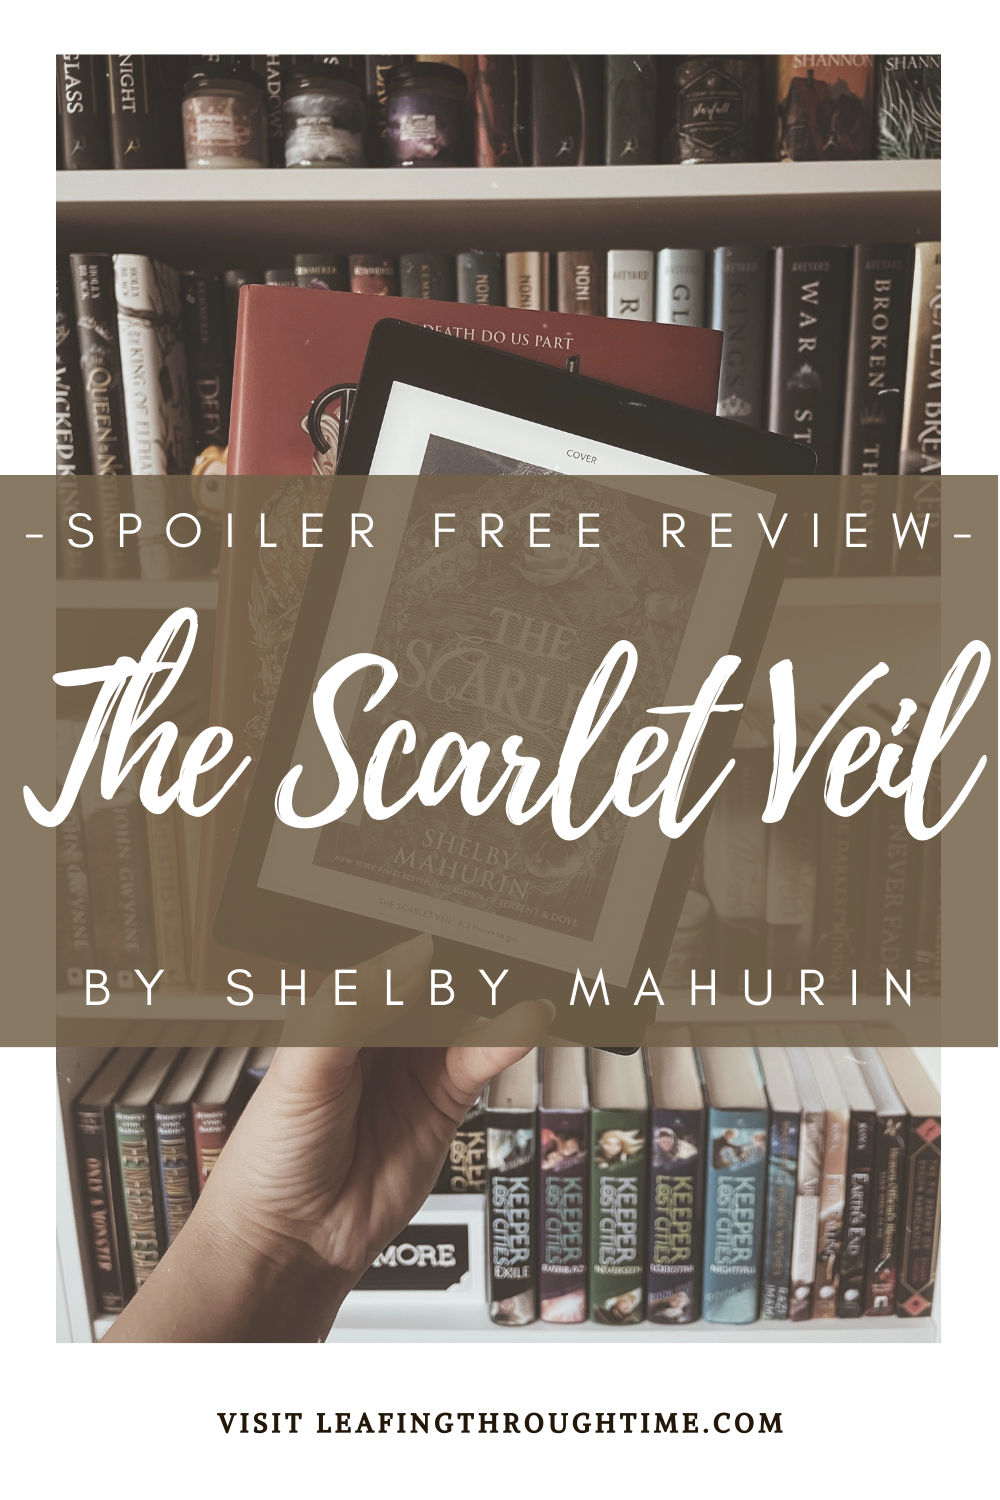 The Scarlet Veil – Spoiler Free Review